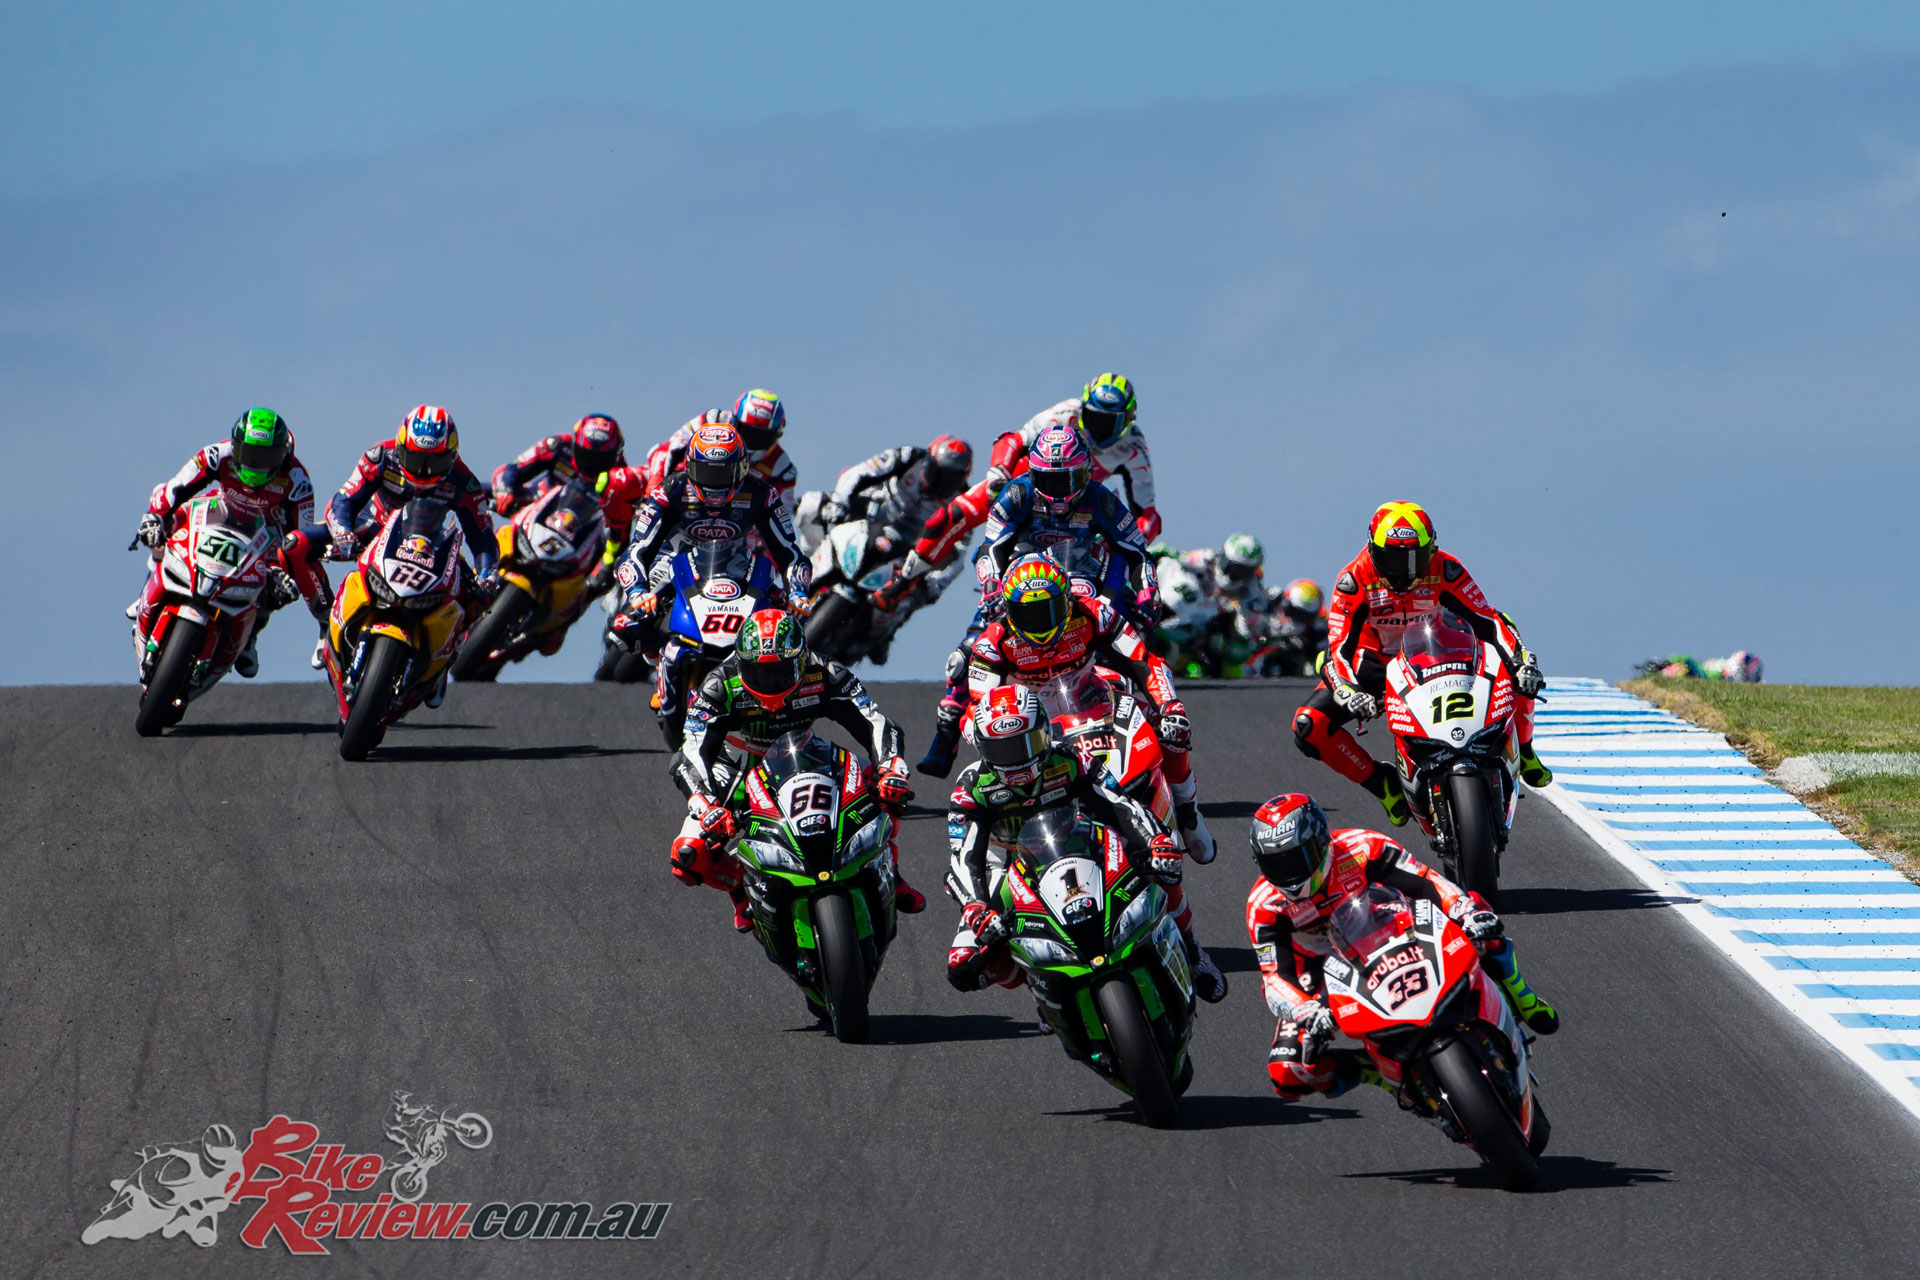 WorldSBK 2019 at Phillip Island tickets are available now - Image by 2Snap